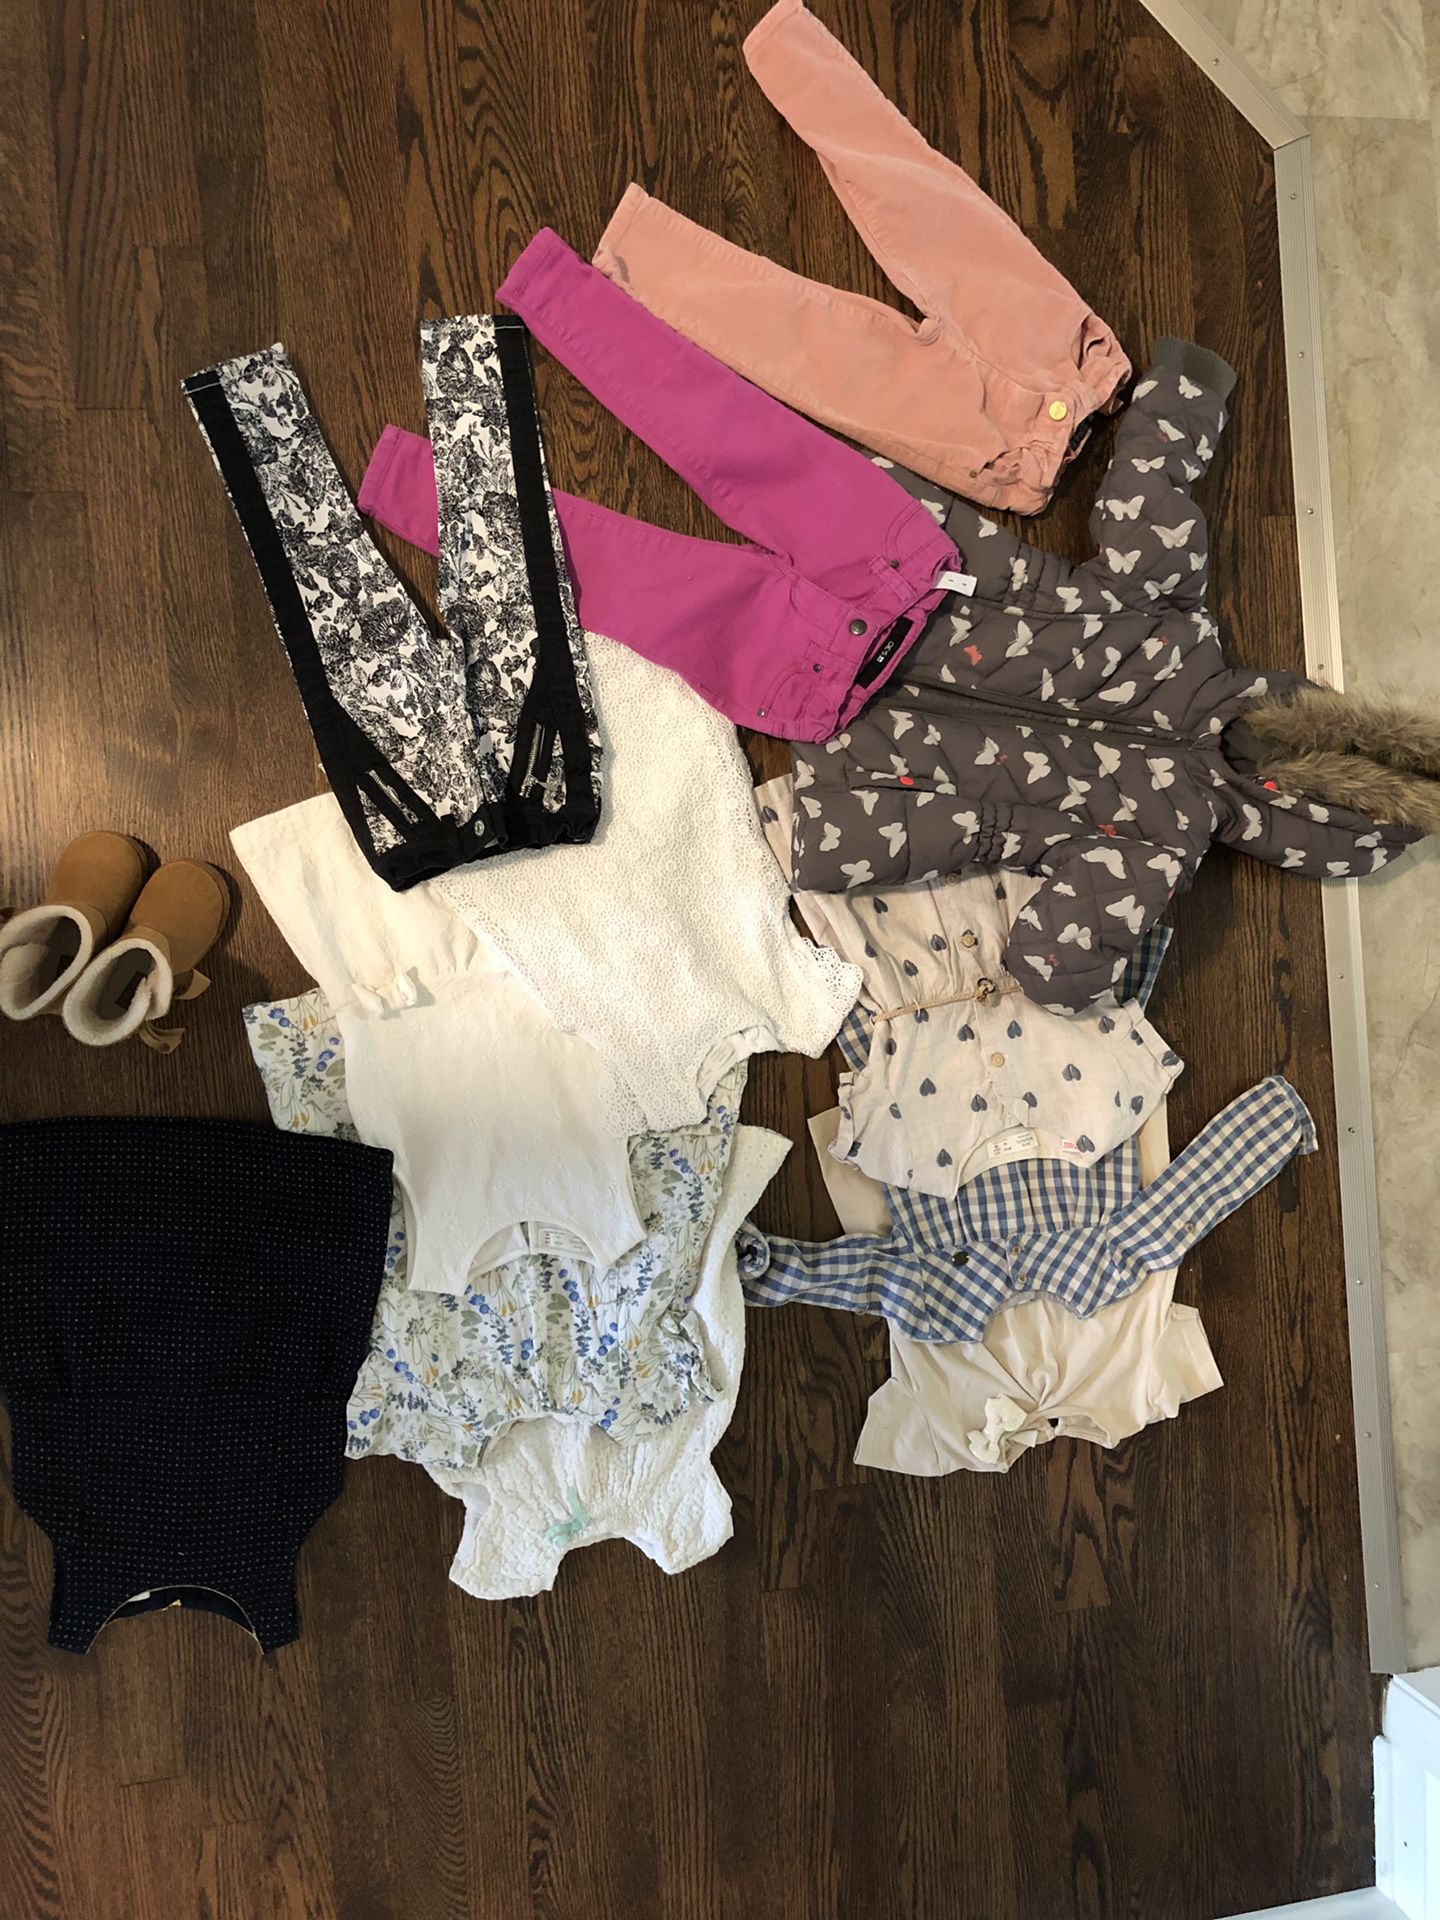 Toddler Girl Clothing Bundle Zara, Joes Jeans, 7 for All Mankind, and Chloe